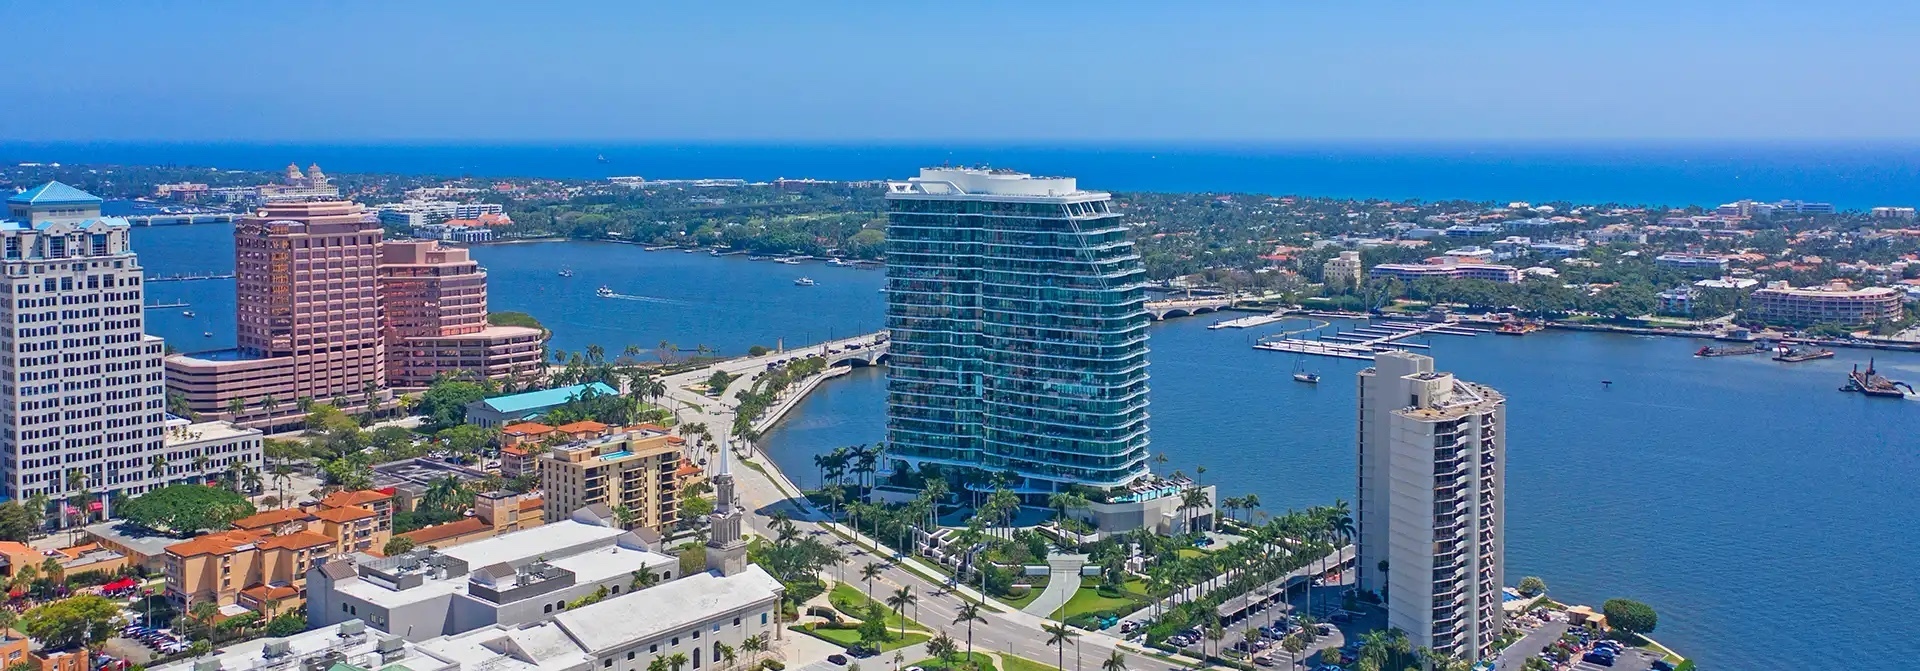 The Bristol Palm Beach | The Bristol Palm Beach Condos For Sale